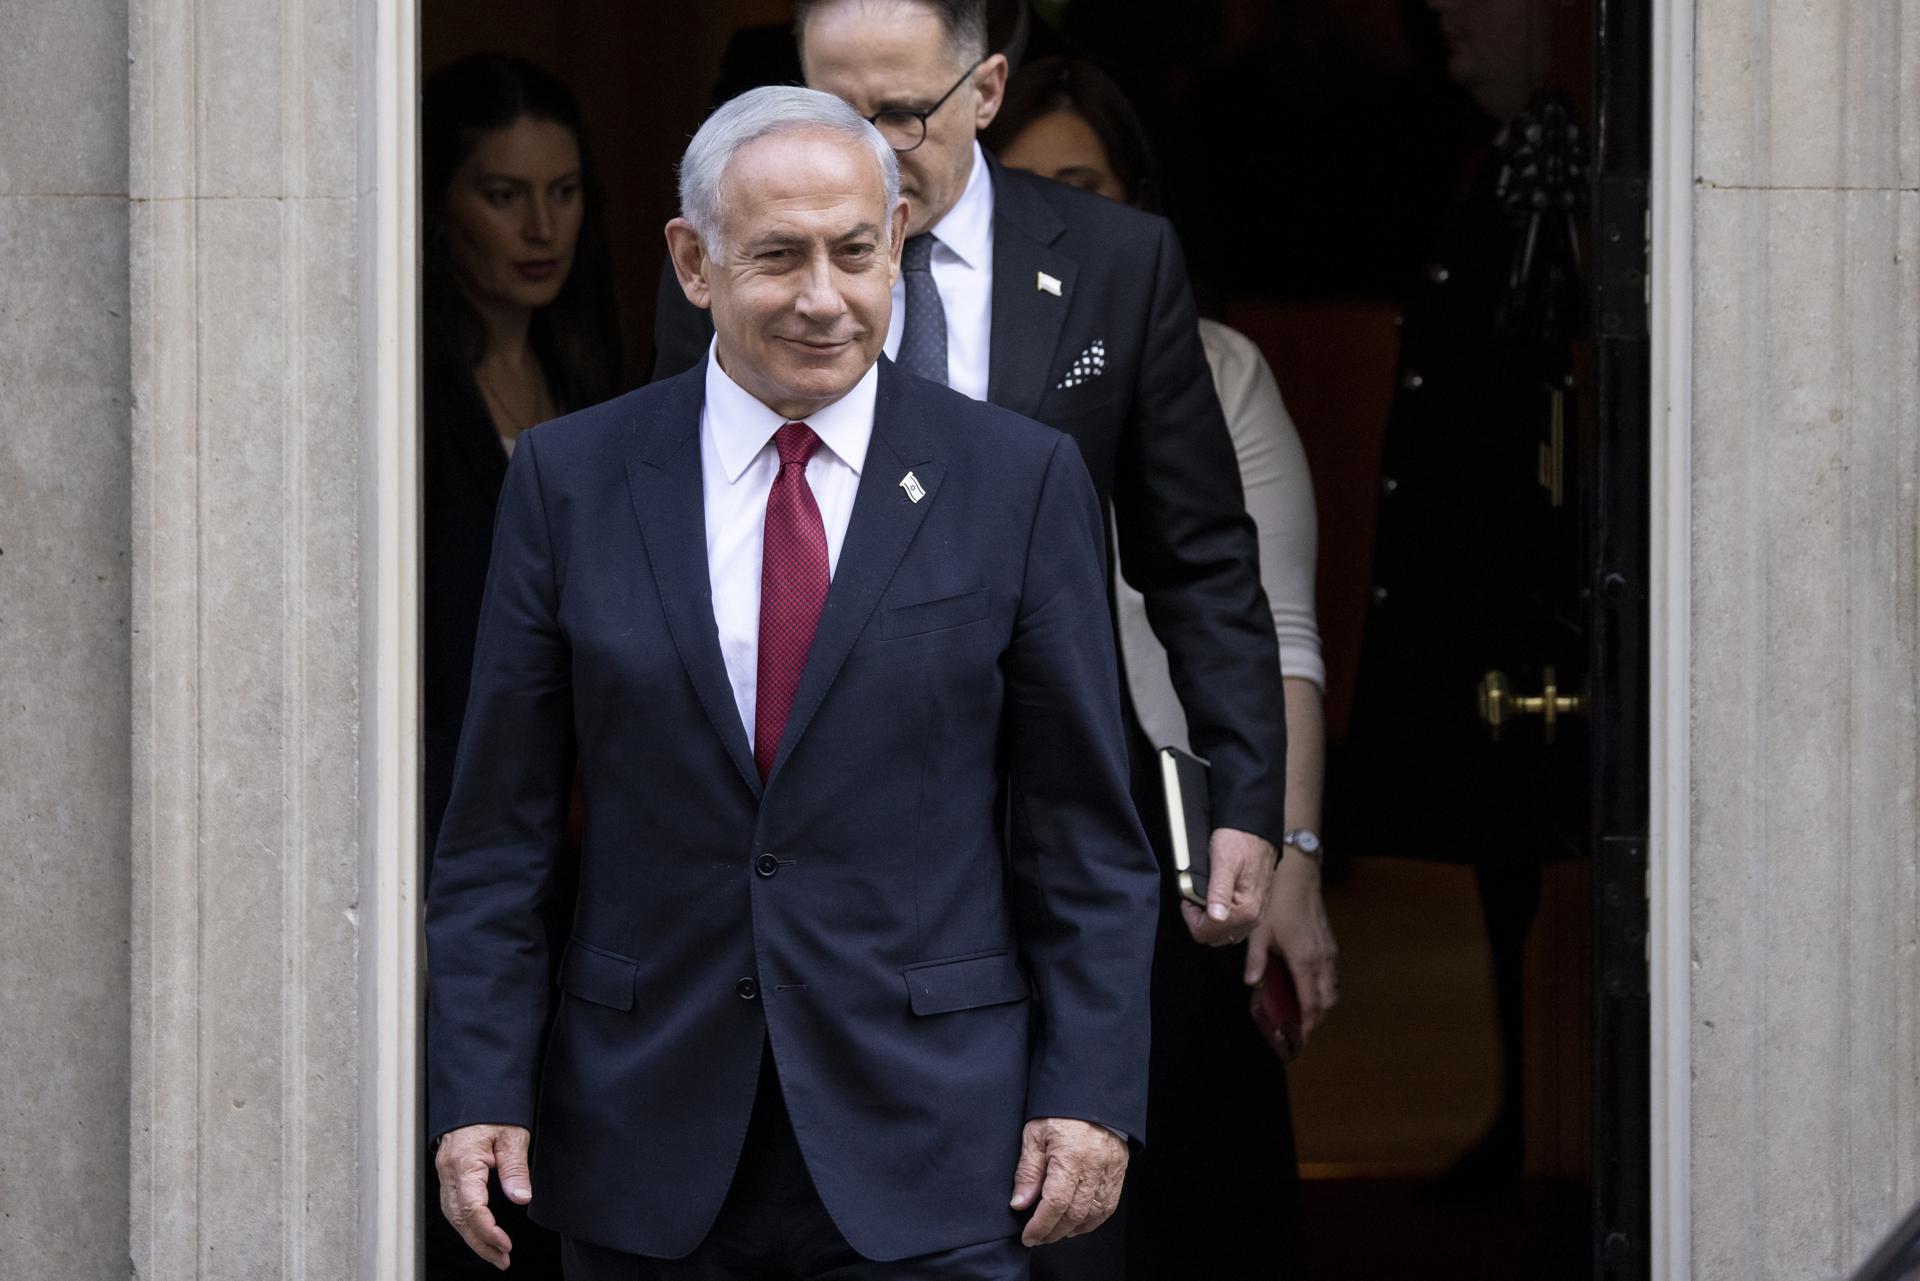 Israeli Prime Minister Benjamin Netanyahu leaves 10 Downing Street following a meeting with the British prime minister in London, Britain, 24 March 2023. EFE/EPA/TOLGA AKMEN